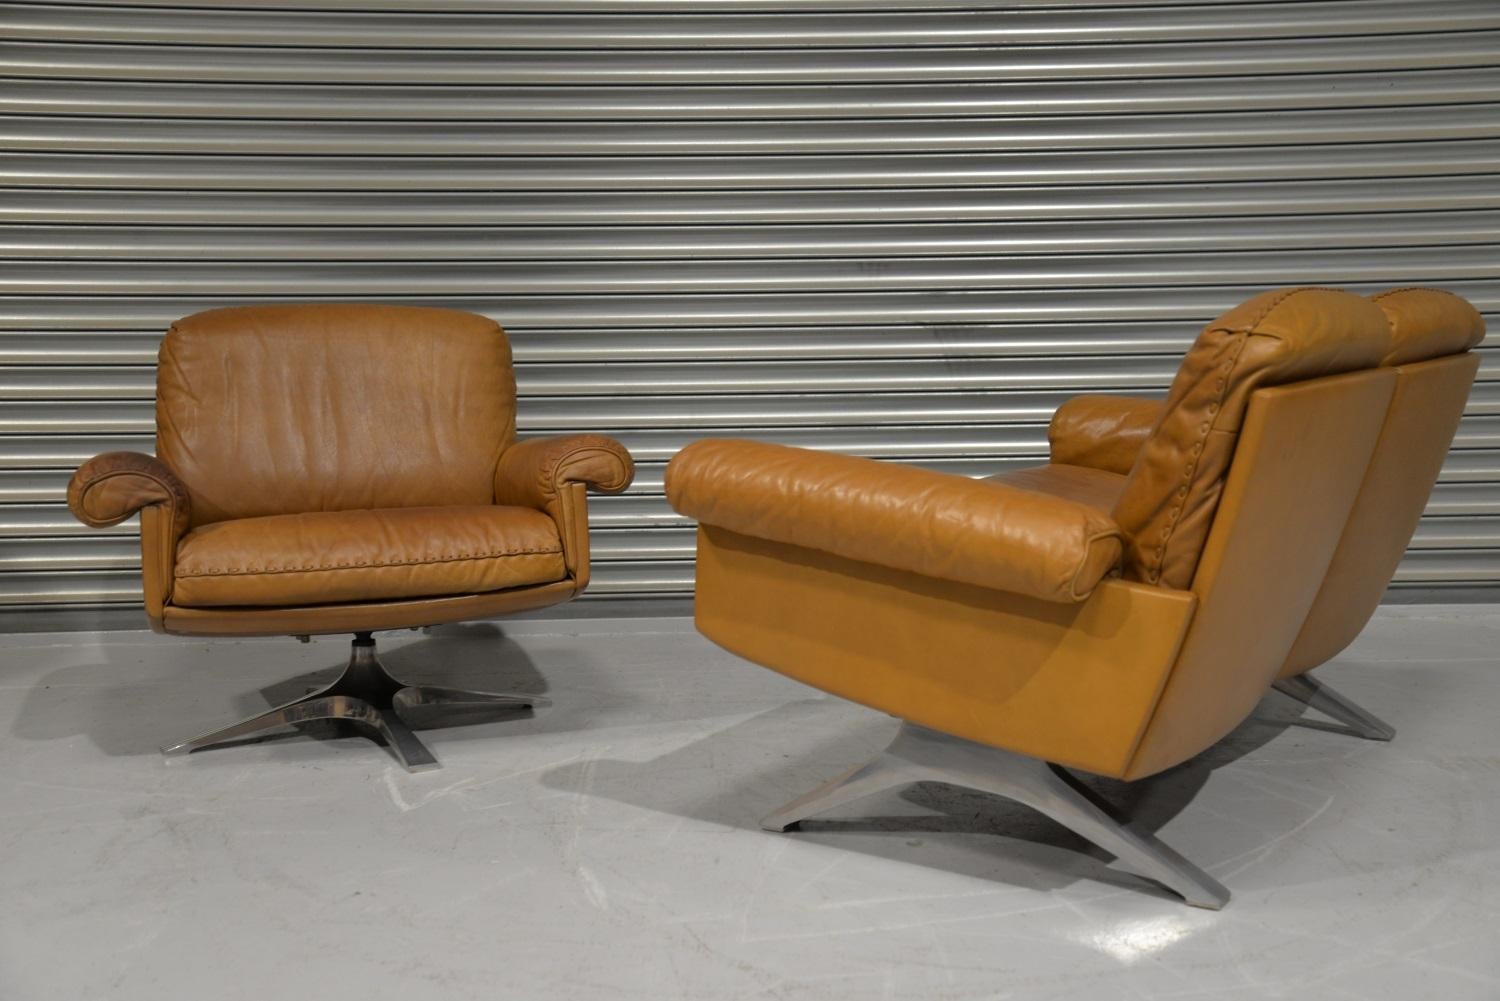 Late 20th Century Vintage De Sede Ds 31 Two-Seat Sofa with Swivel Armchair, Switzerland, 1970s